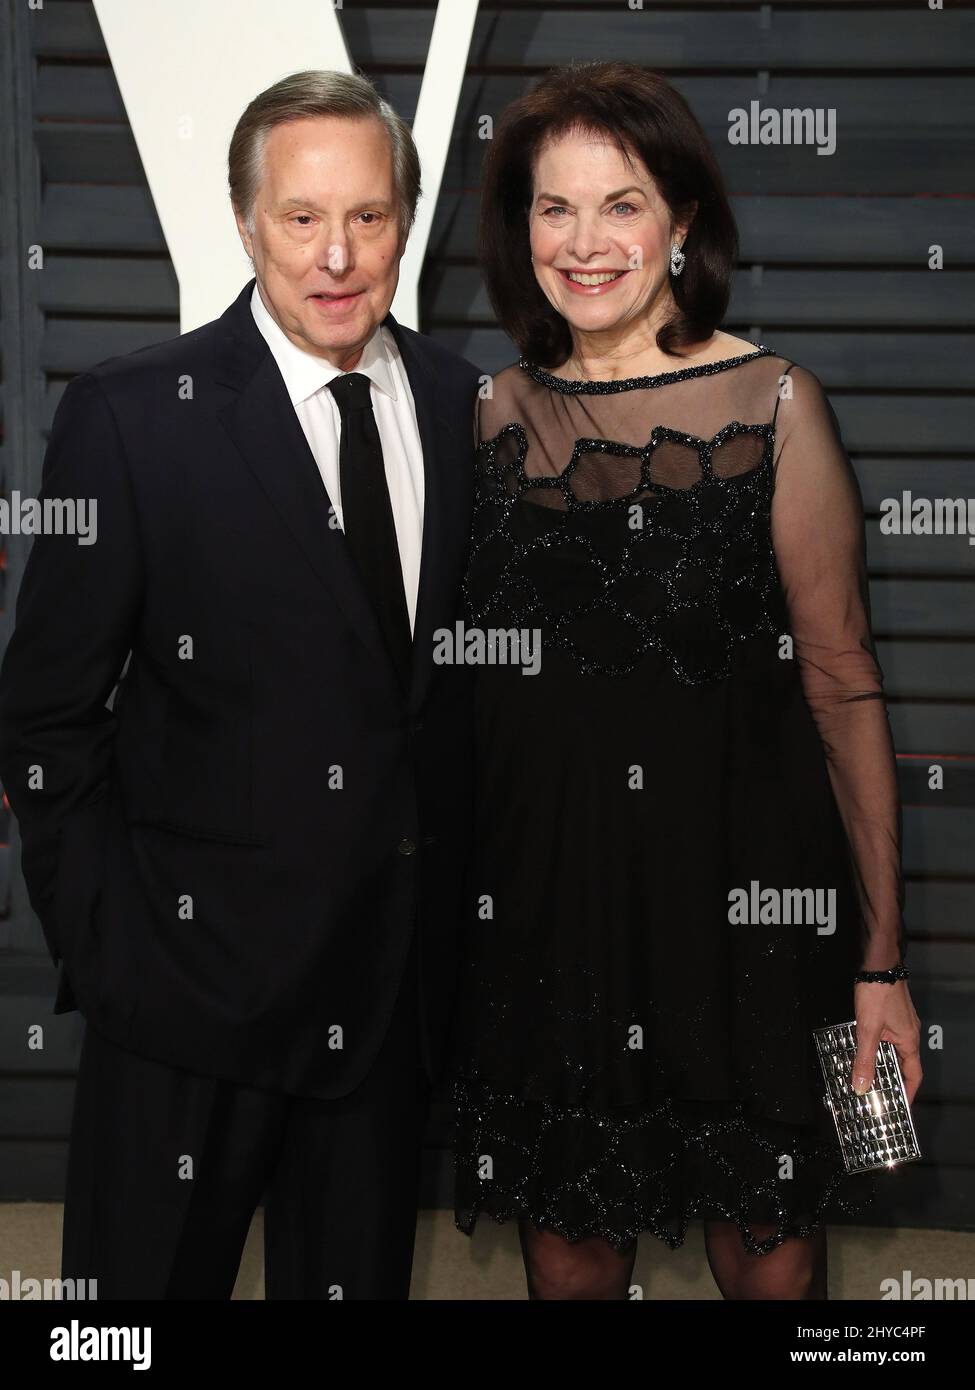 William Friedkin and Sherry Lansing arriving at the Vanity Fair Oscar Party in Beverly Hills, Los Angeles, USA. Stock Photo